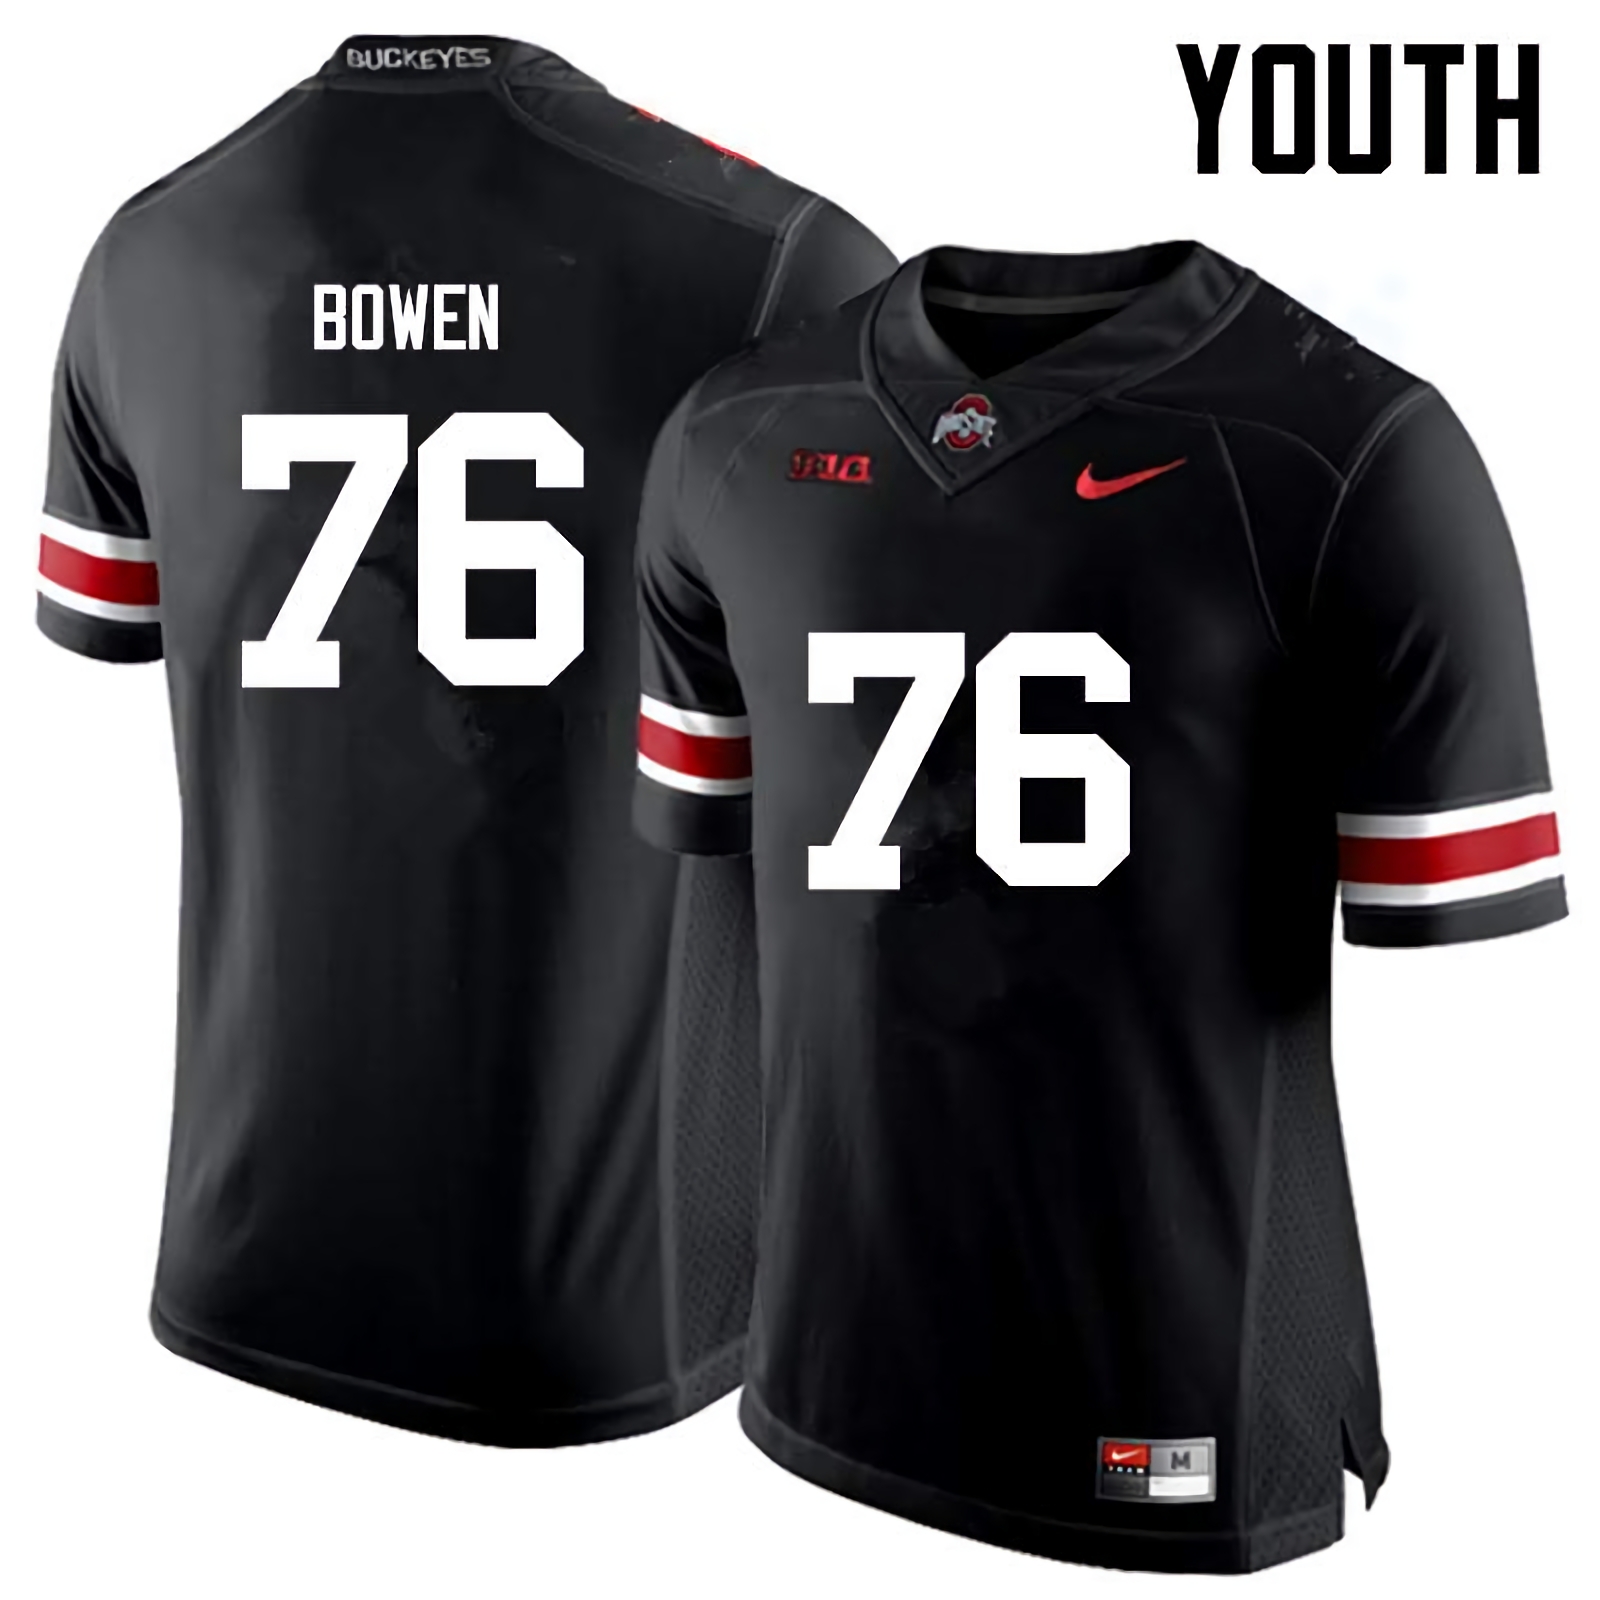 Branden Bowen Ohio State Buckeyes Youth NCAA #76 Nike Black College Stitched Football Jersey JHL7456DC